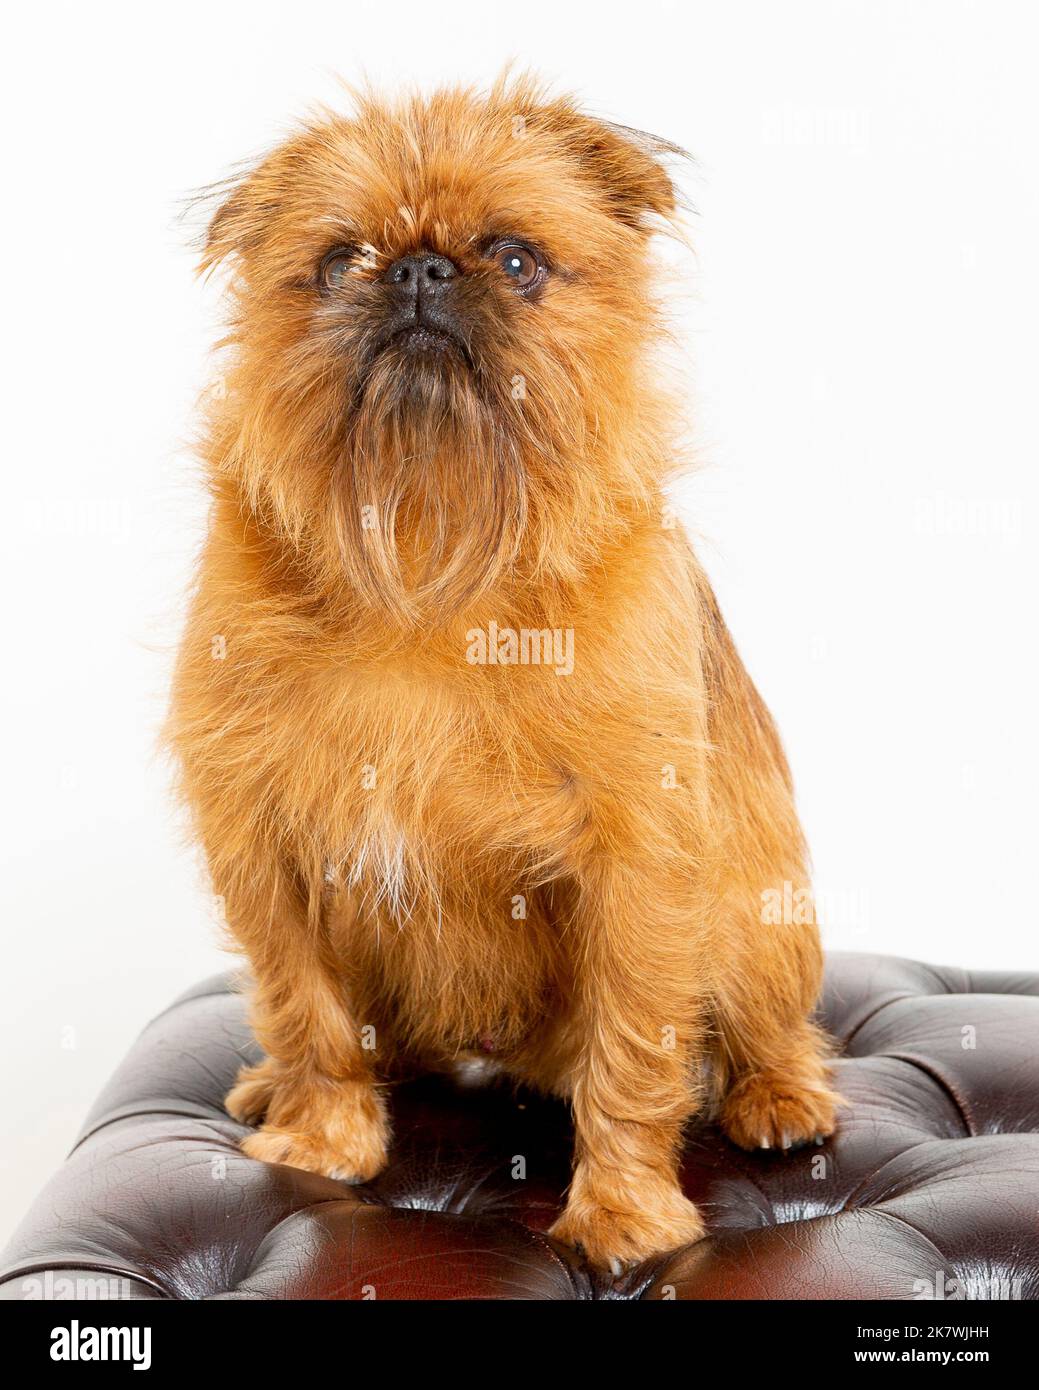 Picture of a Griffon Dog in a Professional Studio Environment Stock Photo